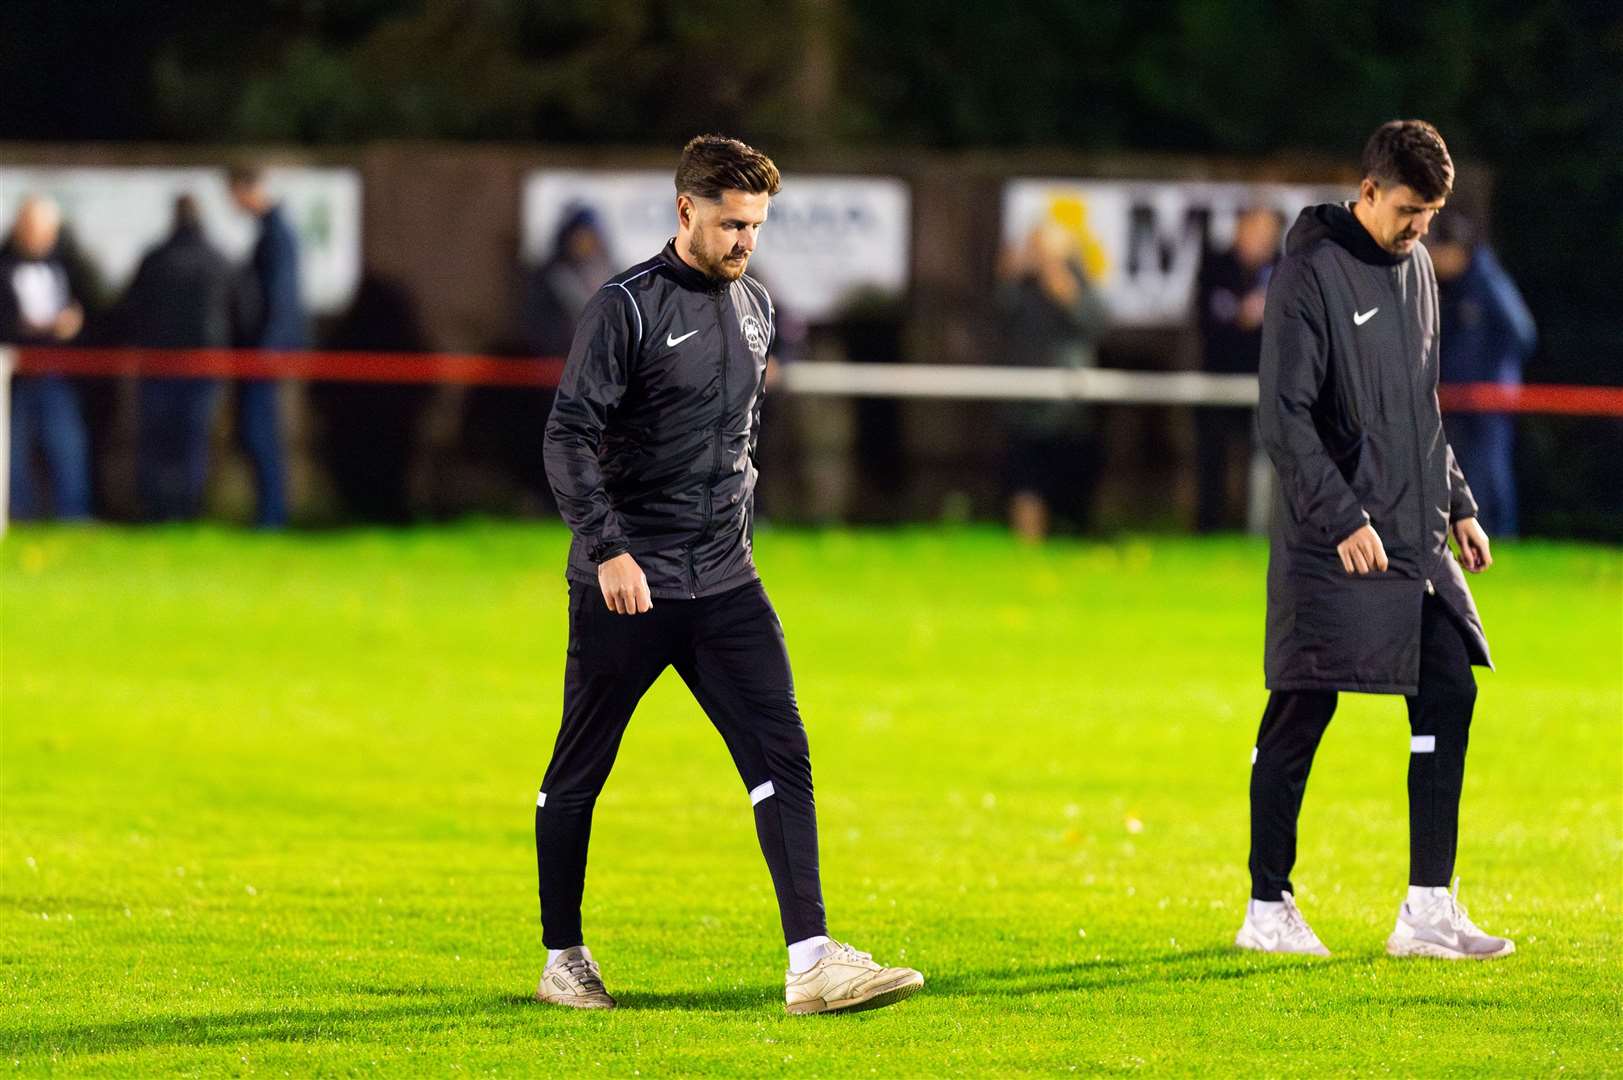 The Downham Town management team of Dale Stokes and Craig Dickson leaving the pitch at half-time during Wednesday night's derby clash at the SCL Memorial Field. Picture: Ian Burt